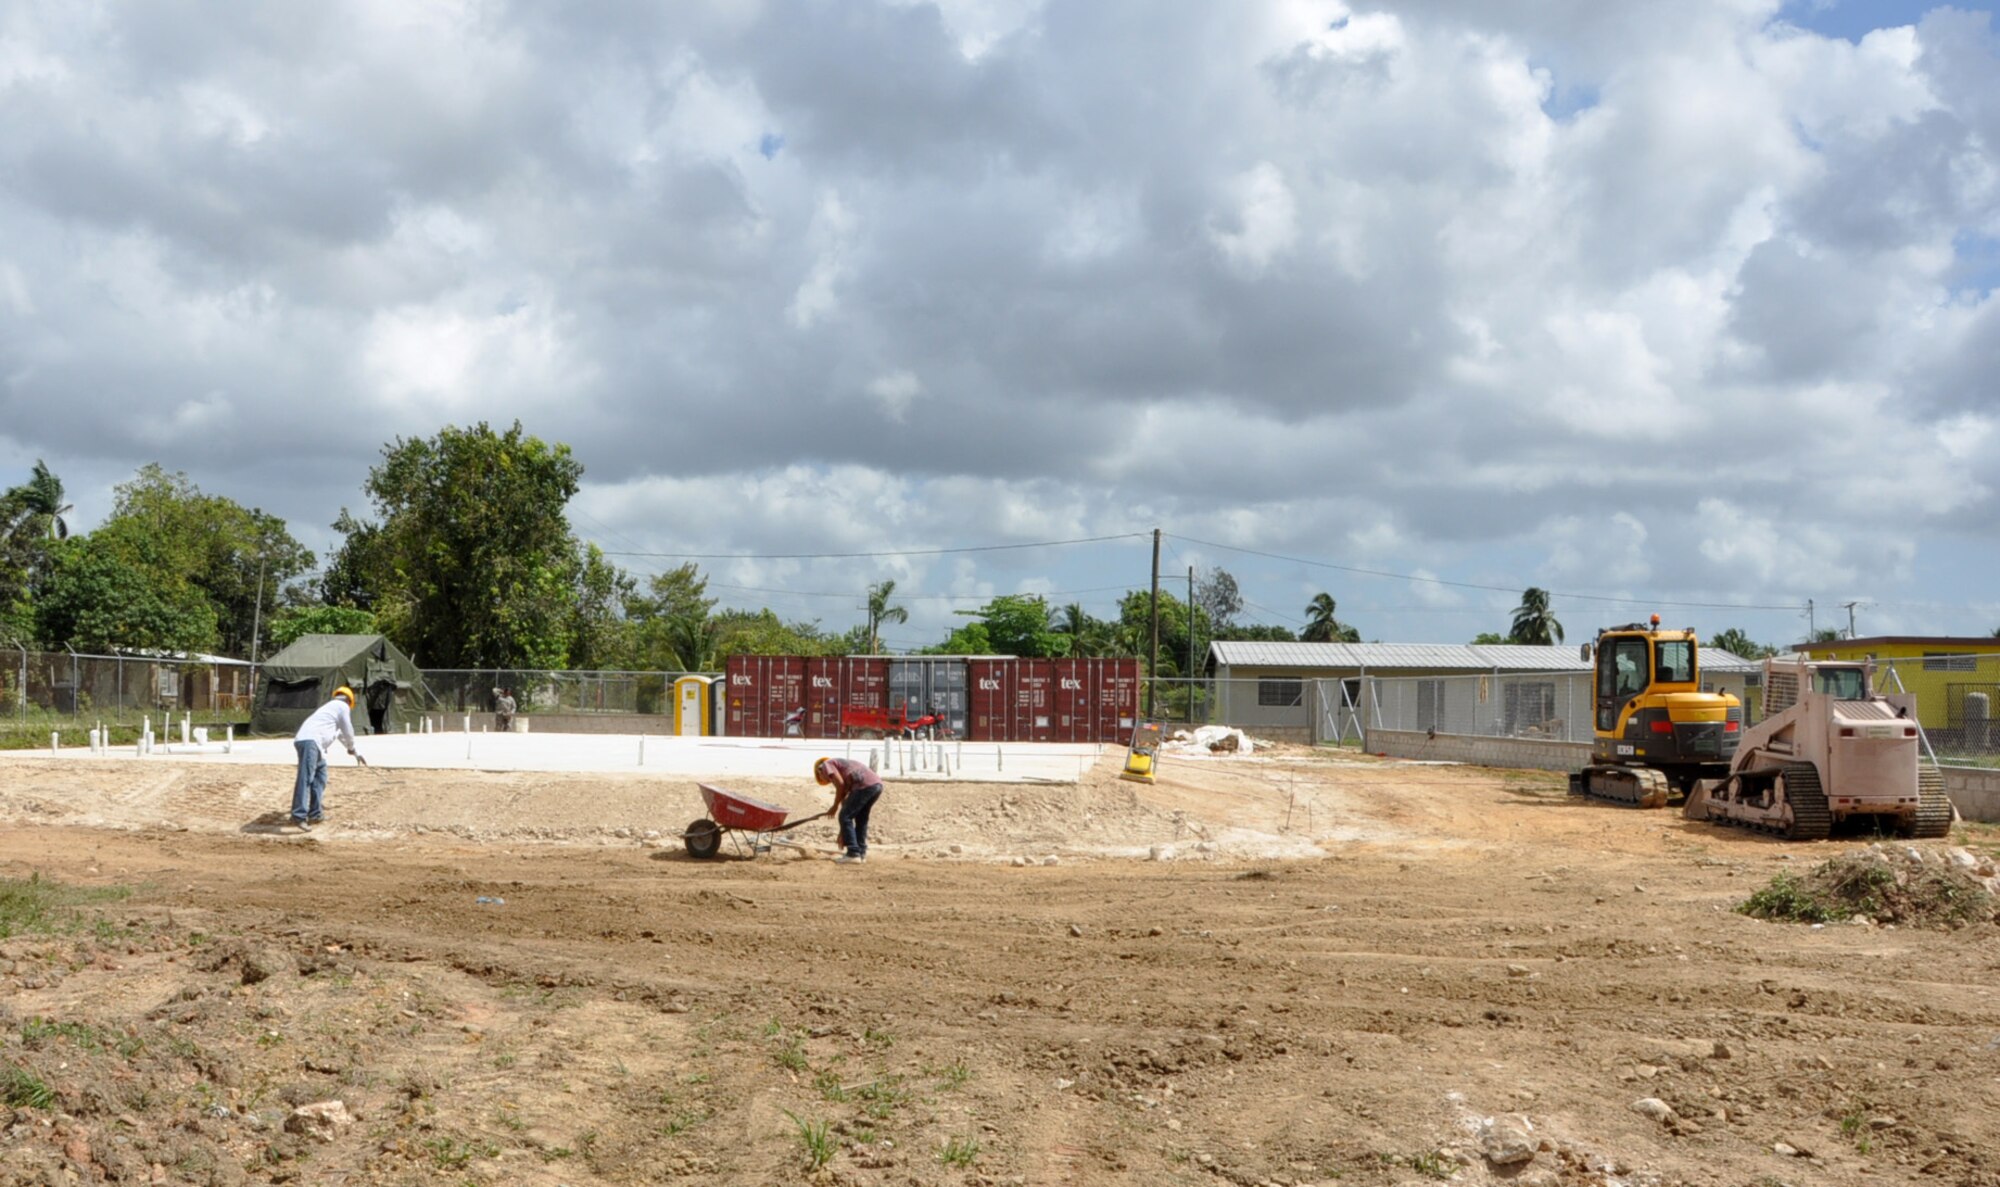 Belizean contractors make final preparations at the Hattieville school construction site March 26, 2014, in Belize City, Belize. Sadie Vernon is one of five construction sites throughout Belize where Belizean Defence Force engineers and U.S. service members will team up to build partnerships and learn from one another. The construction is part of New Horizons Belize 2014, an exercise to enhance BDF and U.S. construction and medical processes. (U.S. Air Force photo by Tech. Sgt. Kali L. Gradishar/Released)






